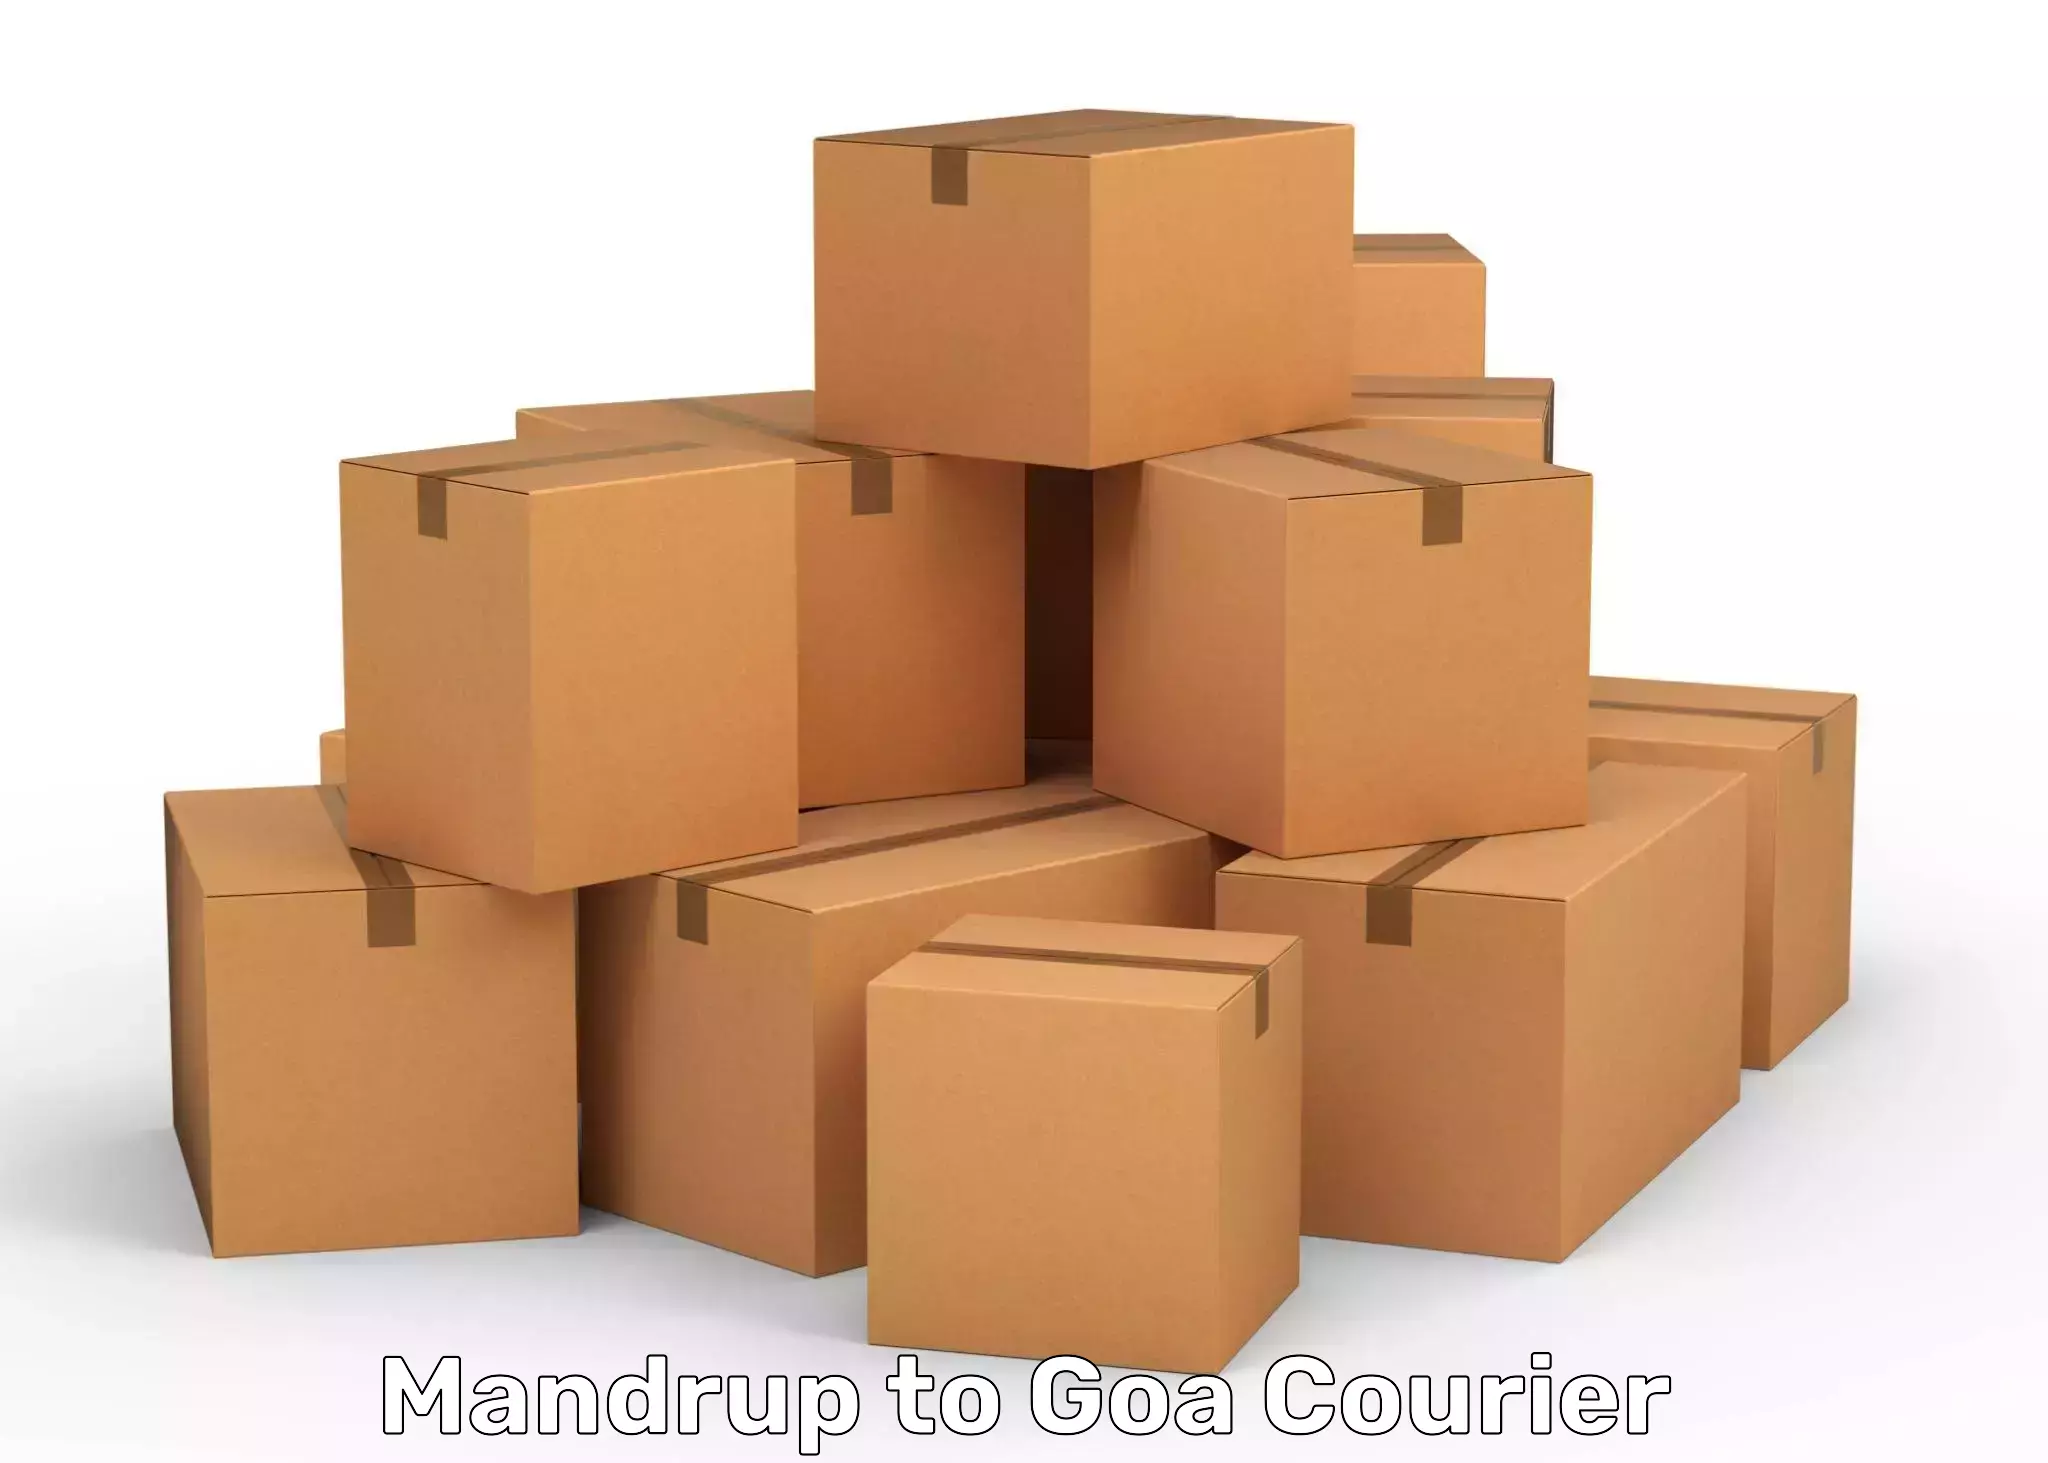 Corporate courier solutions Mandrup to Goa